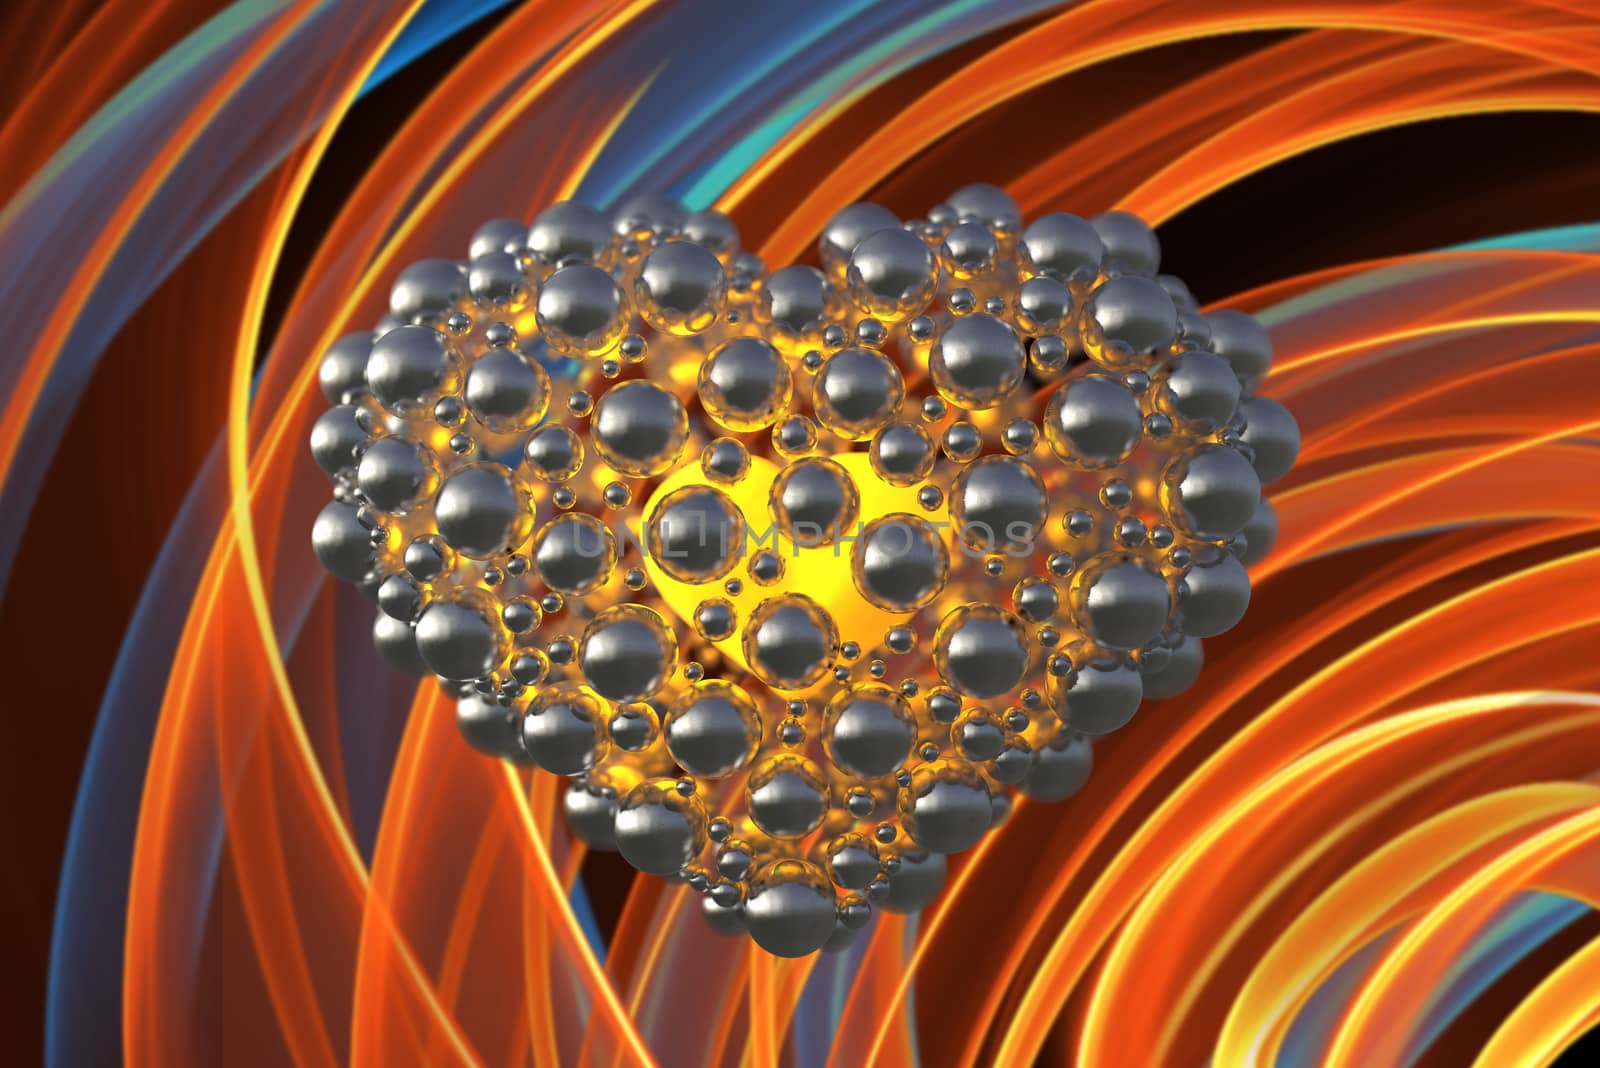 metal gold heart made of spheres with reflections isolated on orange flame background. Happy valentines day 3d illustration.